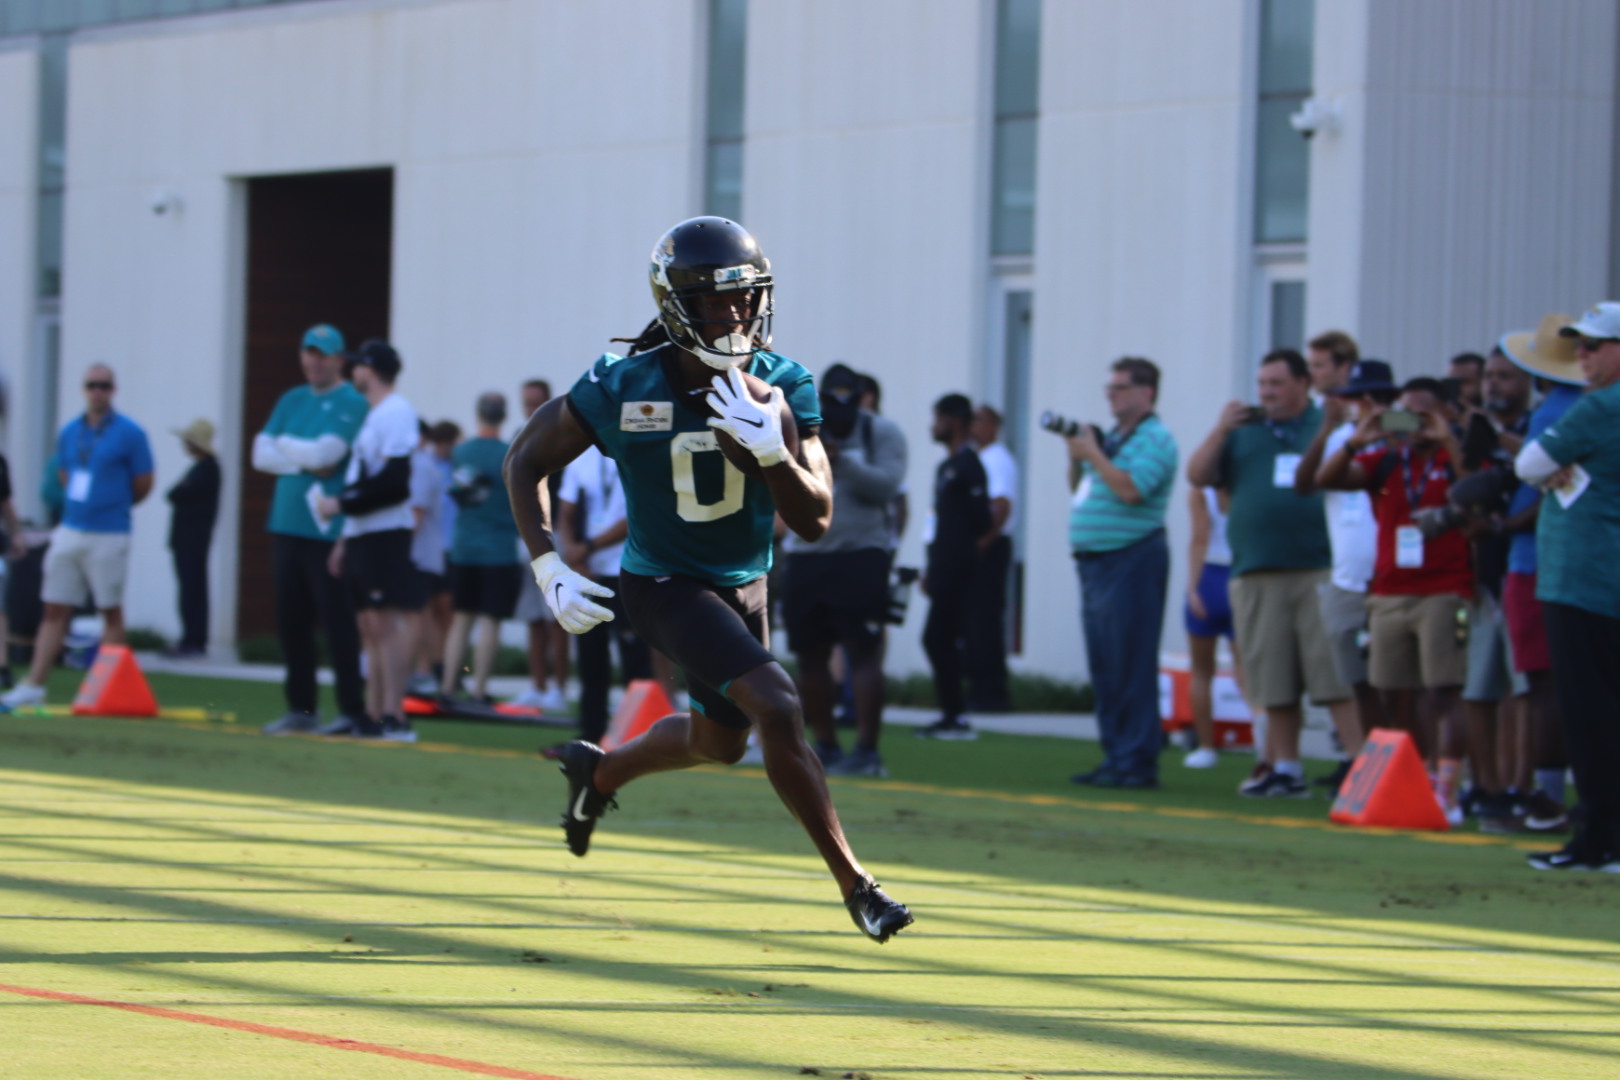 Ridley running with the ball after making a catch